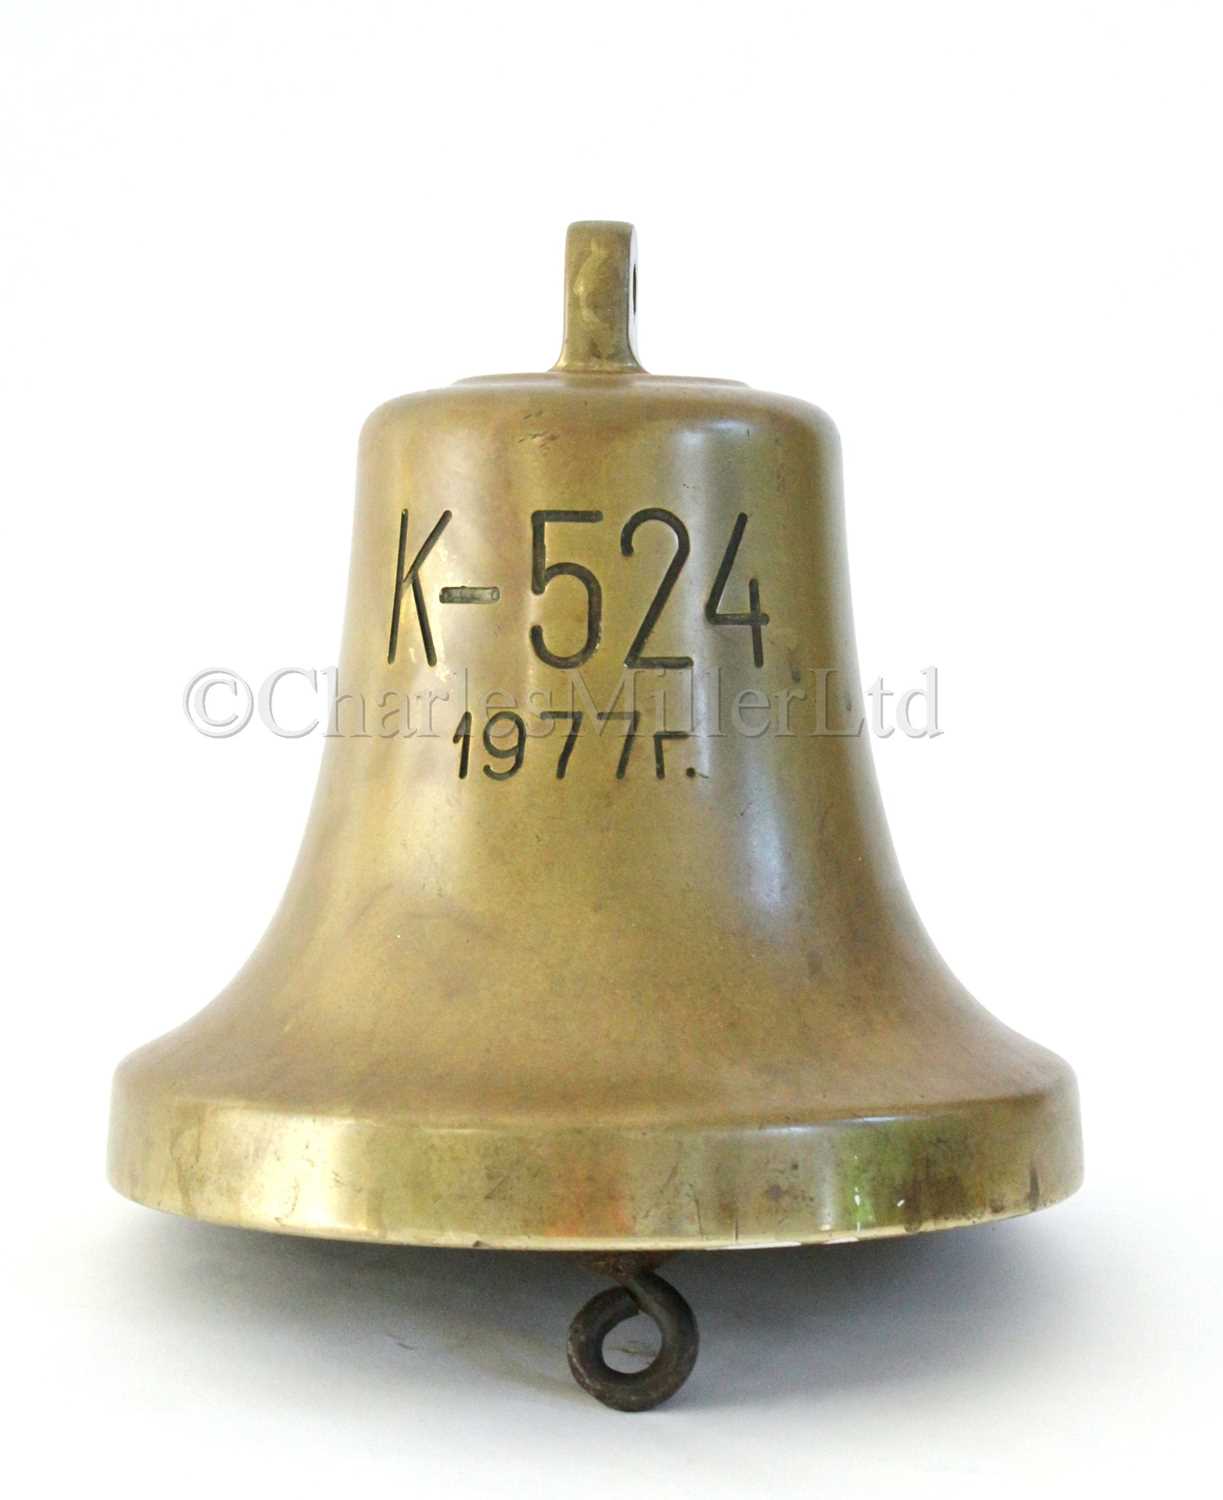 Lot 224 - THE BELL FROM THE 'VICTOR III' CLASS RUSSIAN NUCLEAR POWERED ATTACK SUBMARINE K-524, 1977